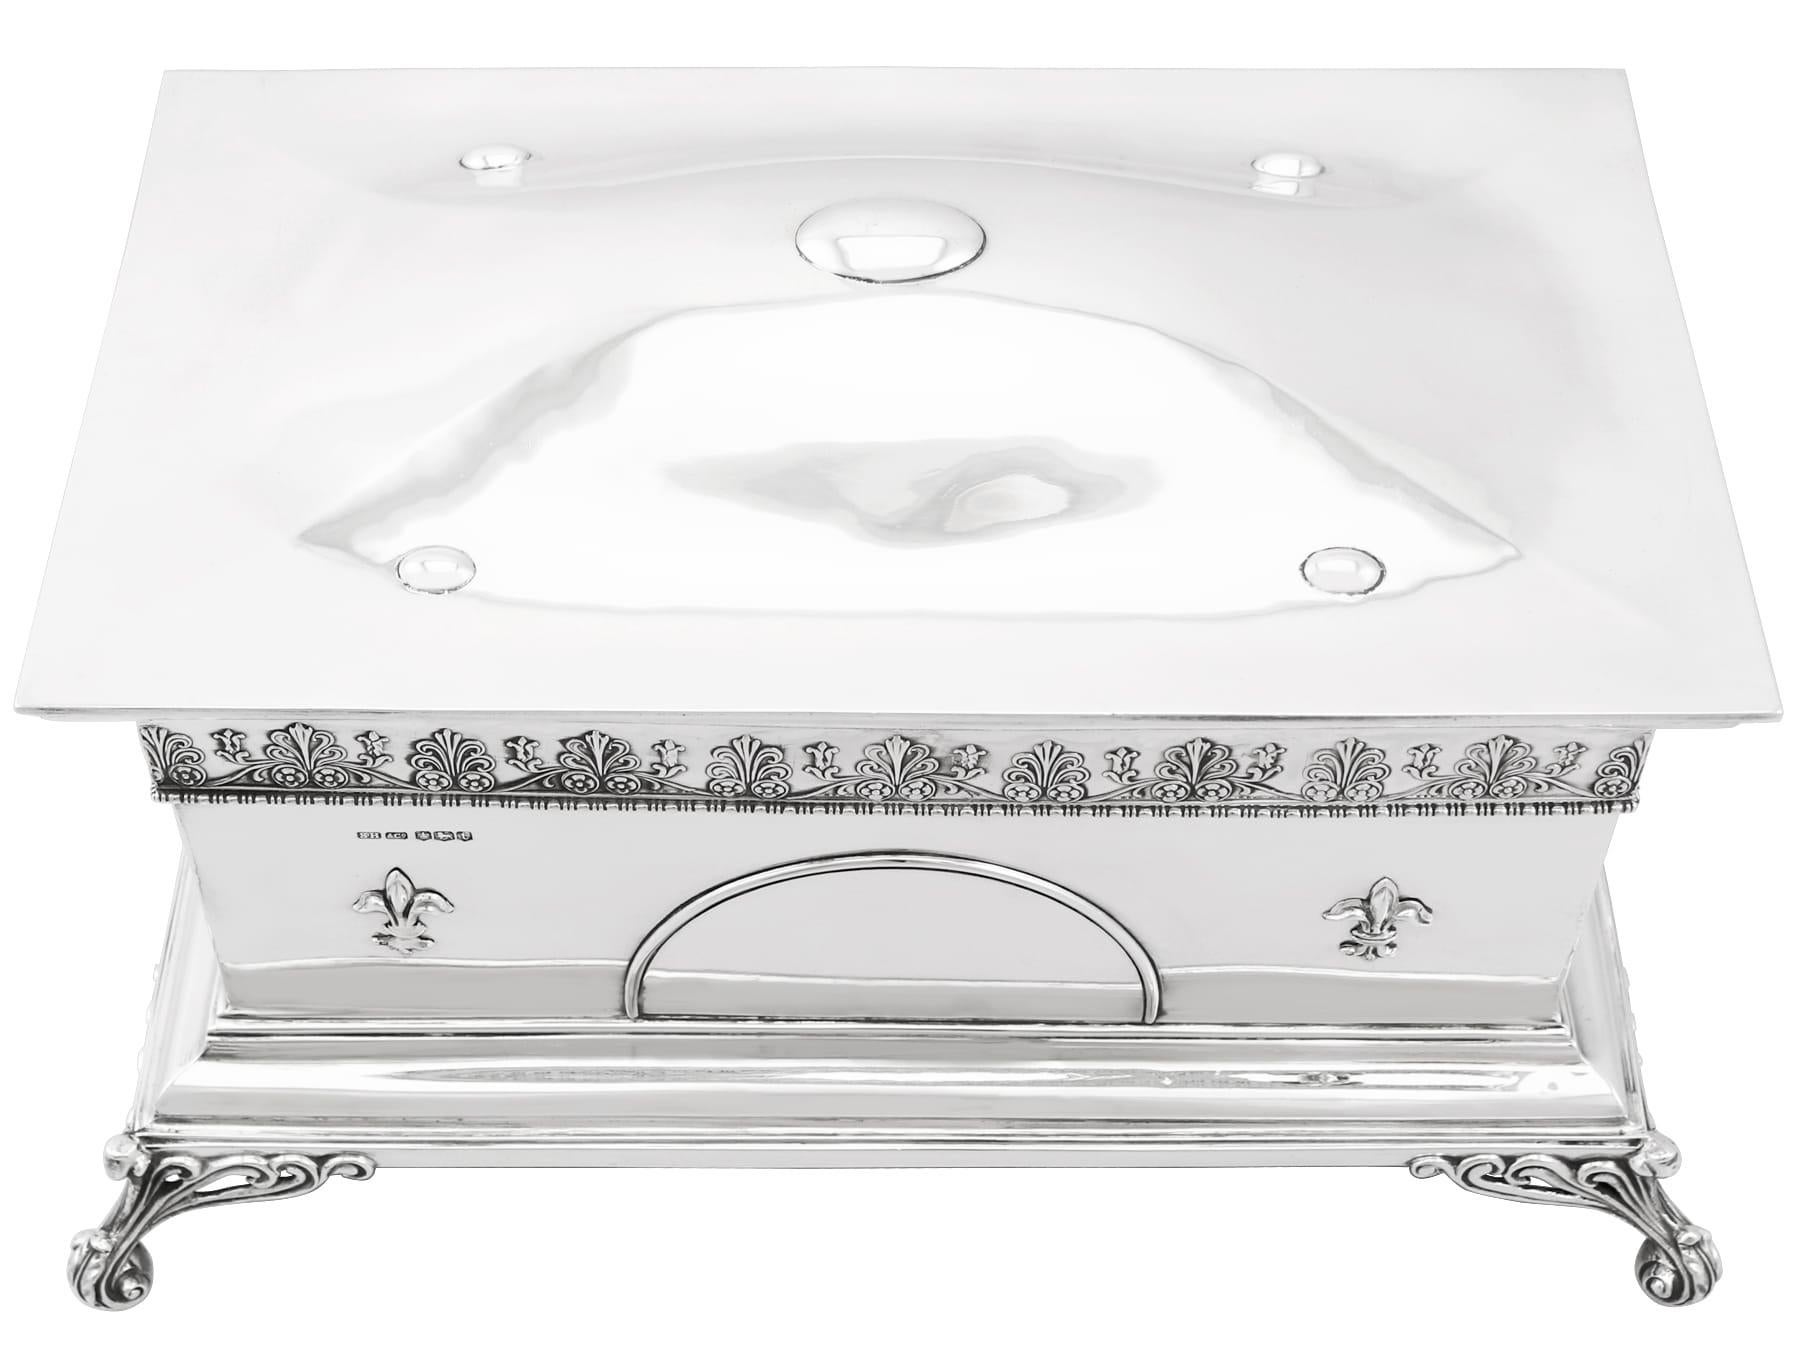 This magnificent antique jewellery casket in sterling silver has a rectangular form onto four bracket style feet.

The anterior surface of this antique Edward VIII jewelry casket is embellished with a semi-circular vacant cartouche flanked with